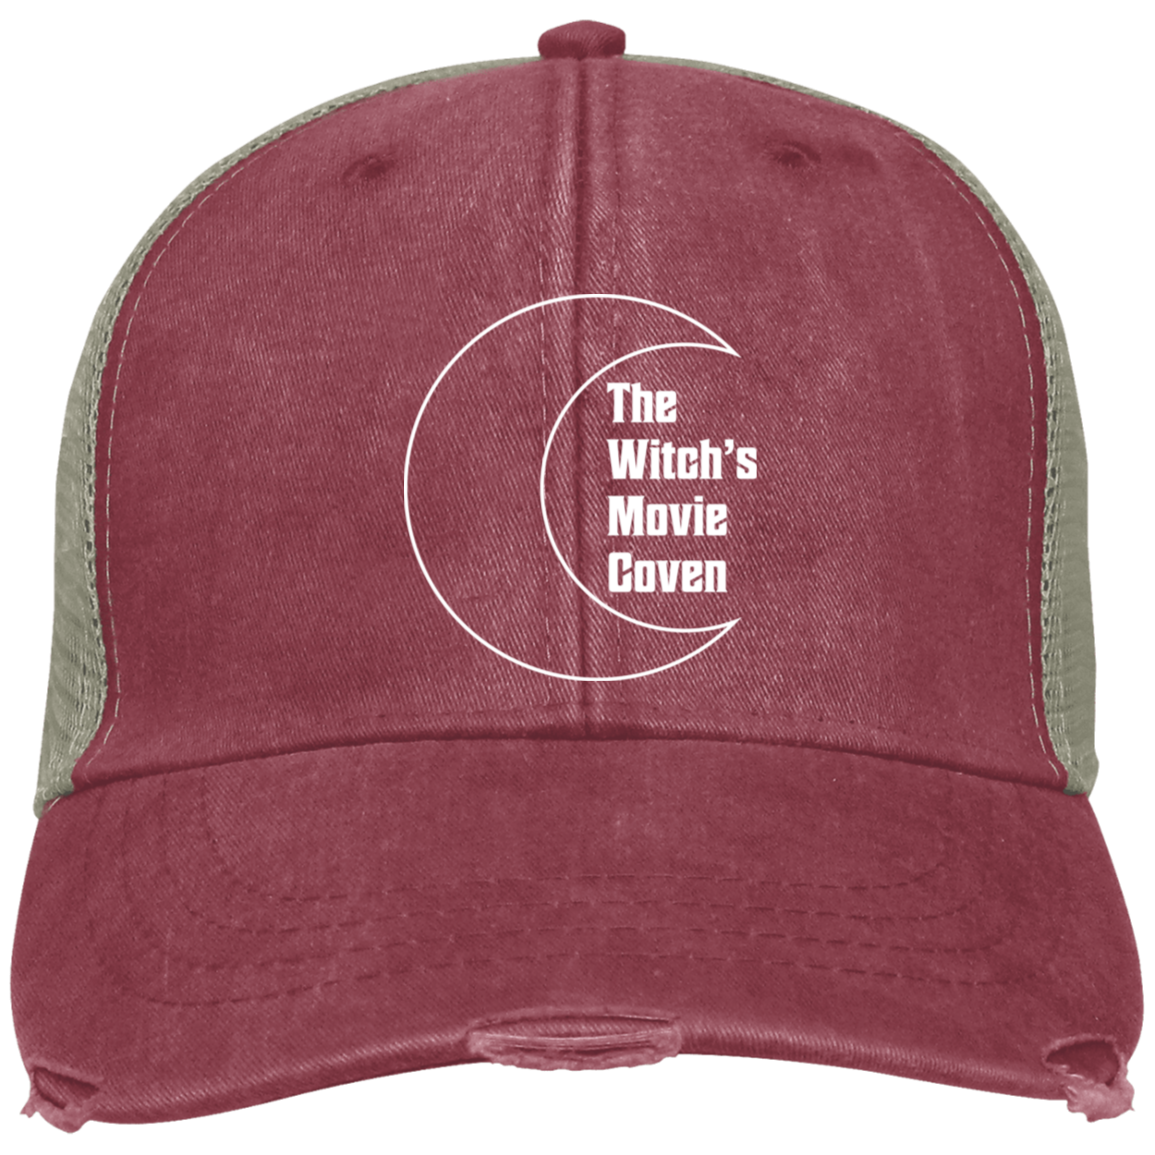 The Witch's Movie Coven Embroidered Trucker Hat